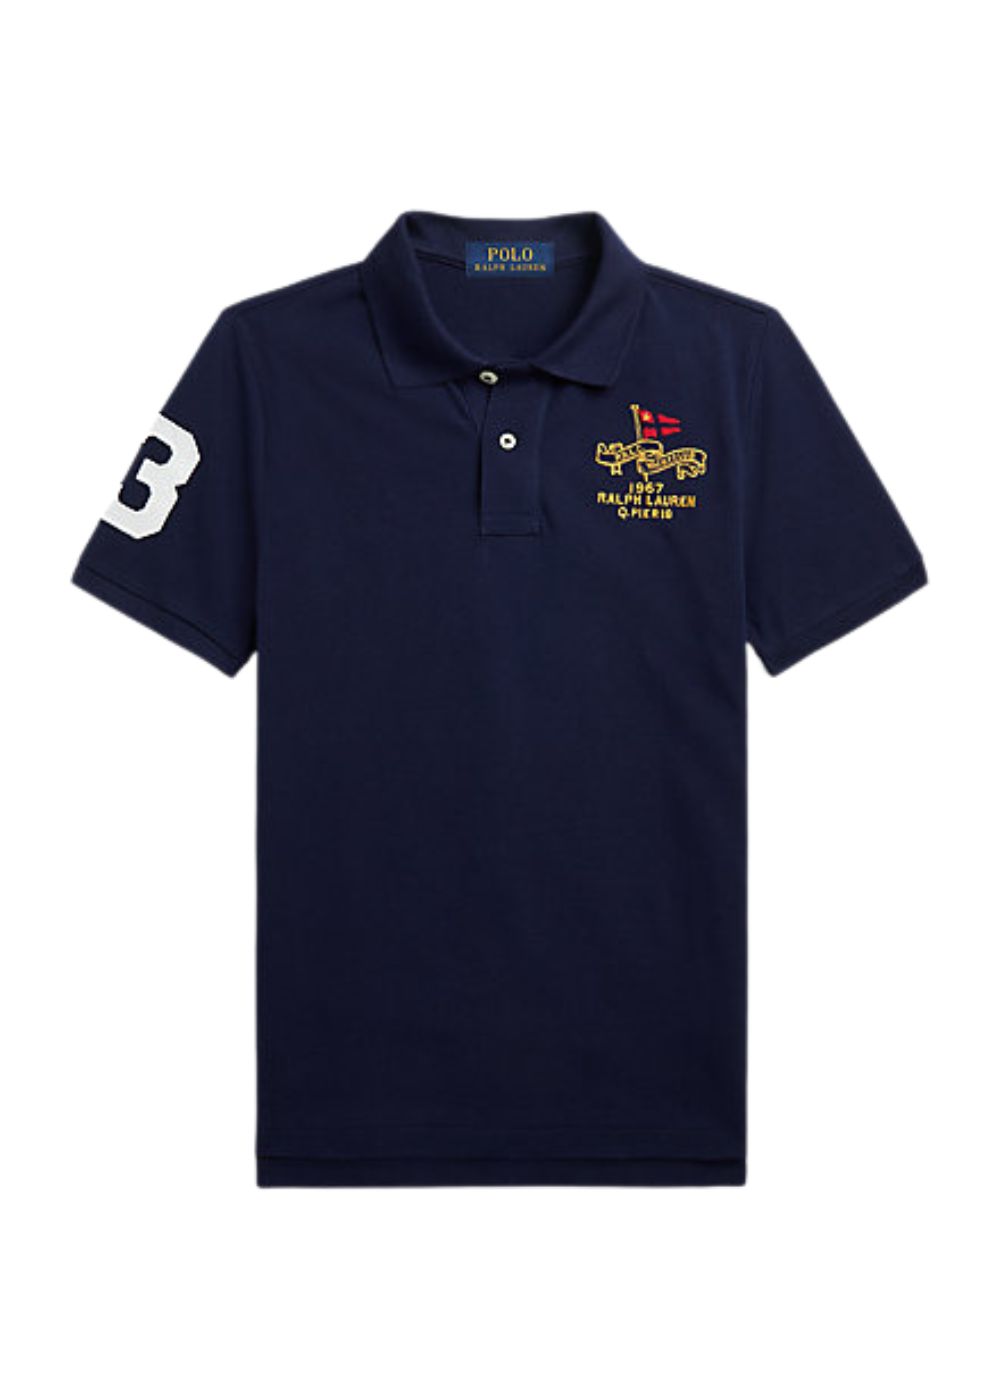 Featured image for “Polo Ralph Lauren Polo Yacht Club”